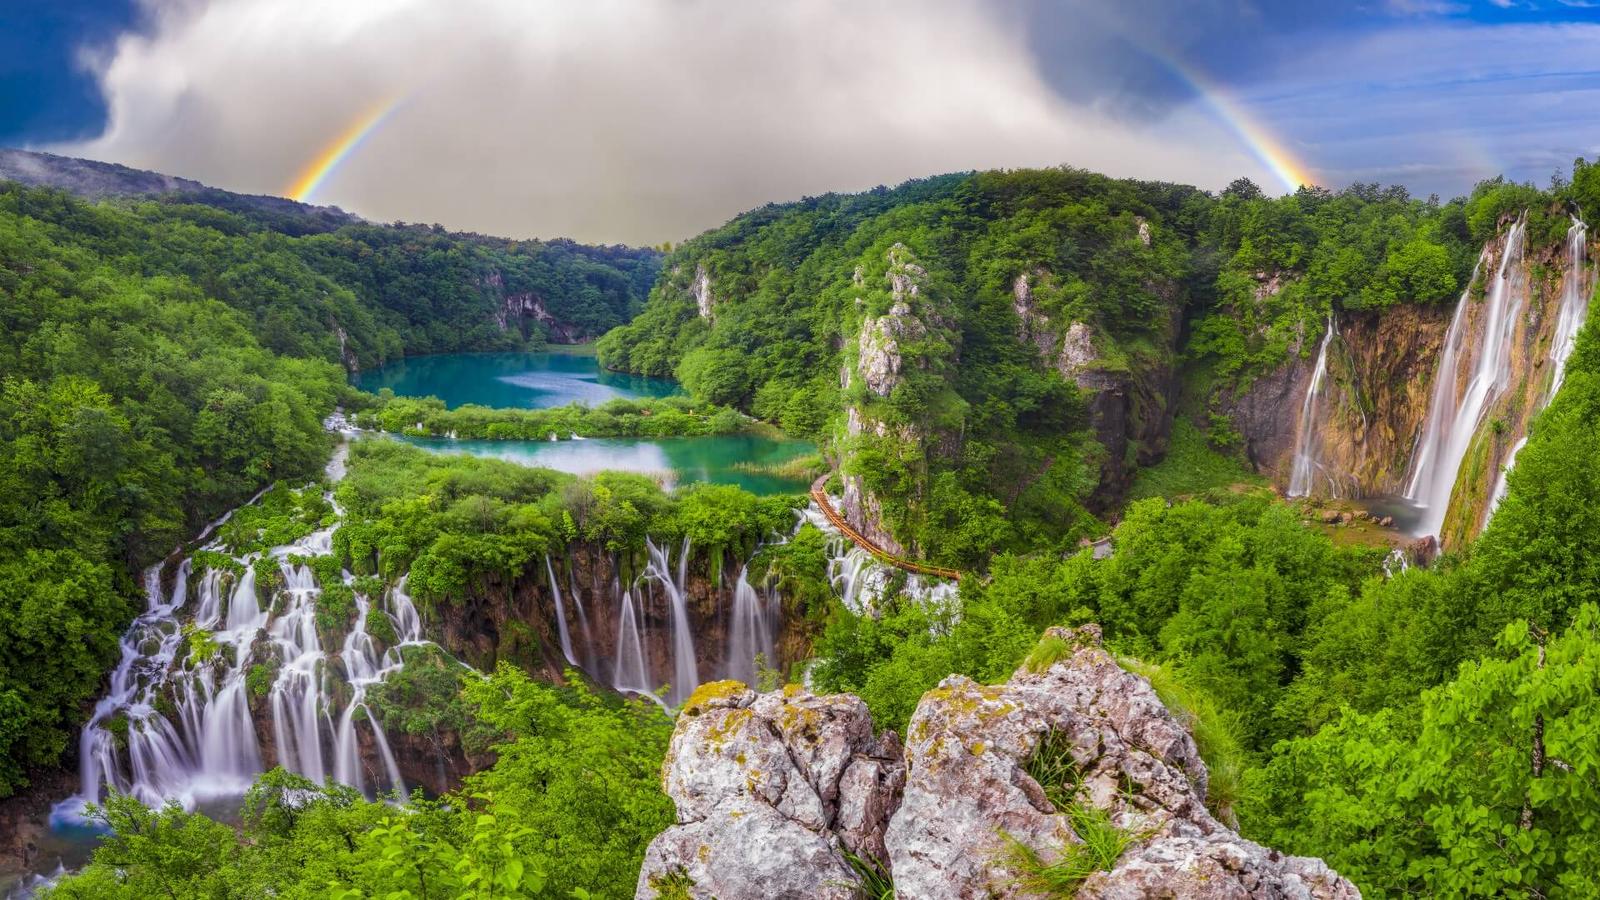 Can You Match These Extraordinary Natural Features to Their Respective Countries? Plitvice Lakes National Park Waterfalls, Croatia